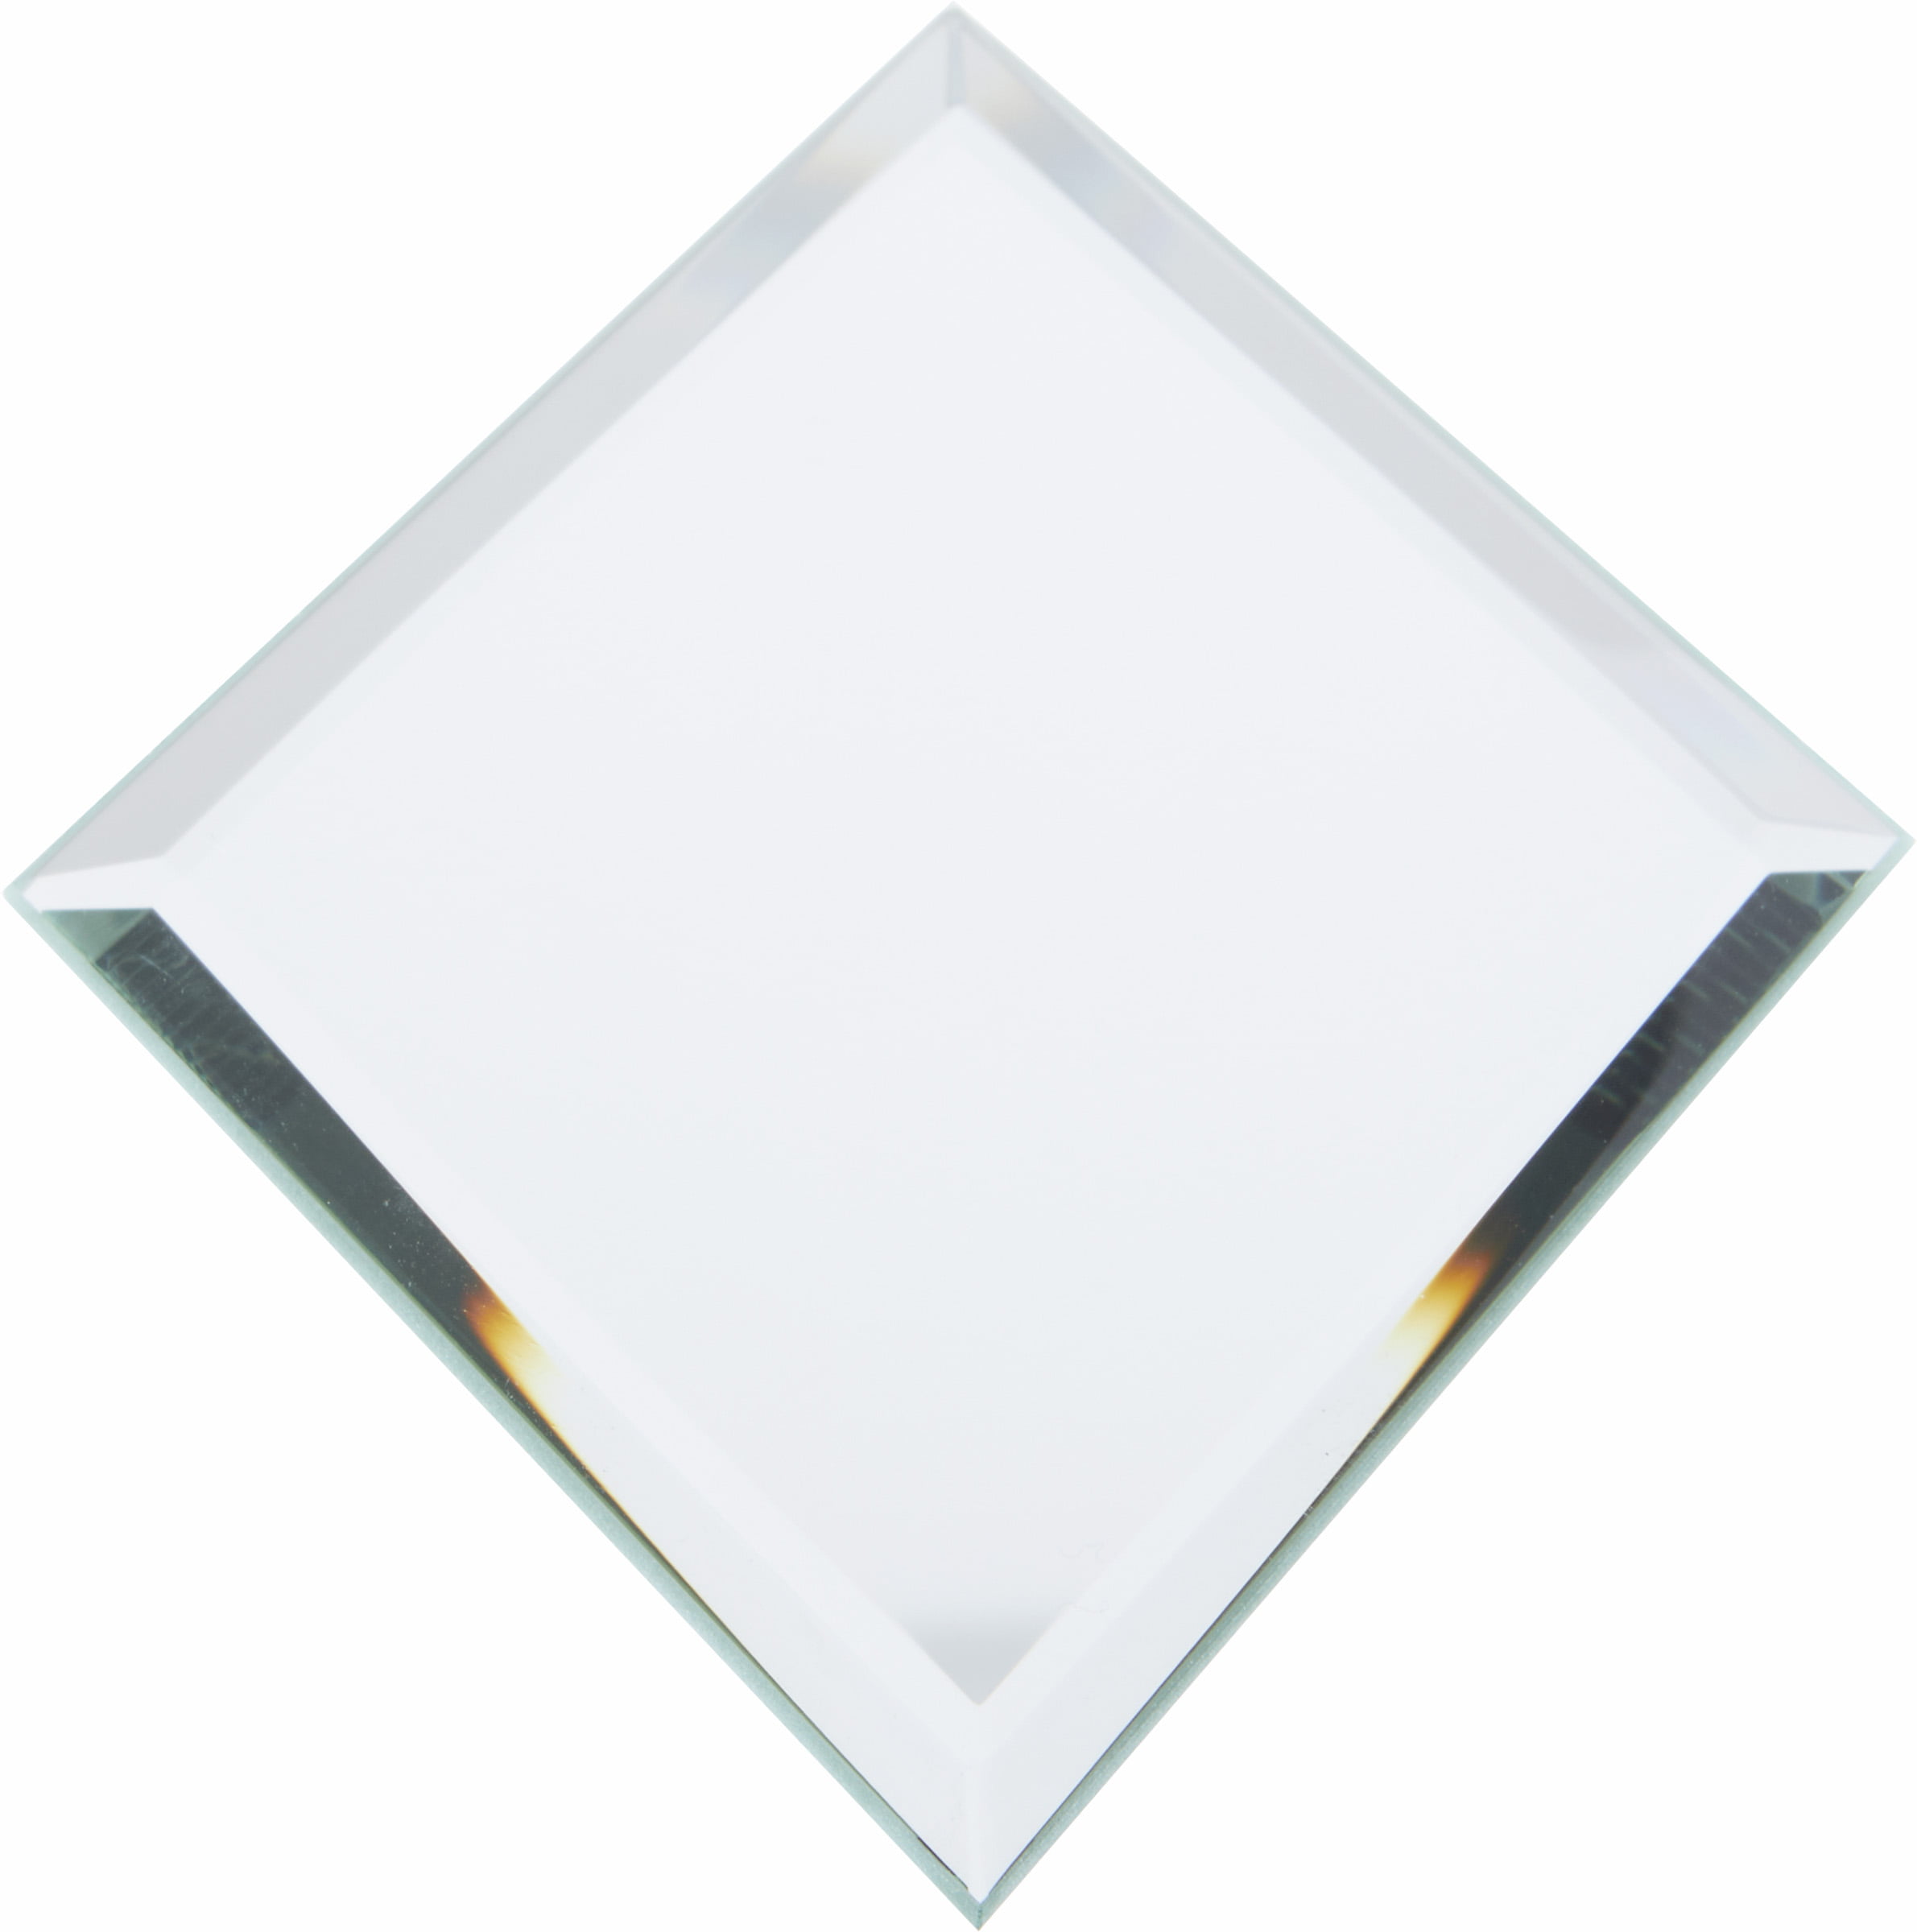 Pack of 3 Plymor Oval 5mm Beveled Glass Mirror 5 inch x 7 inch 